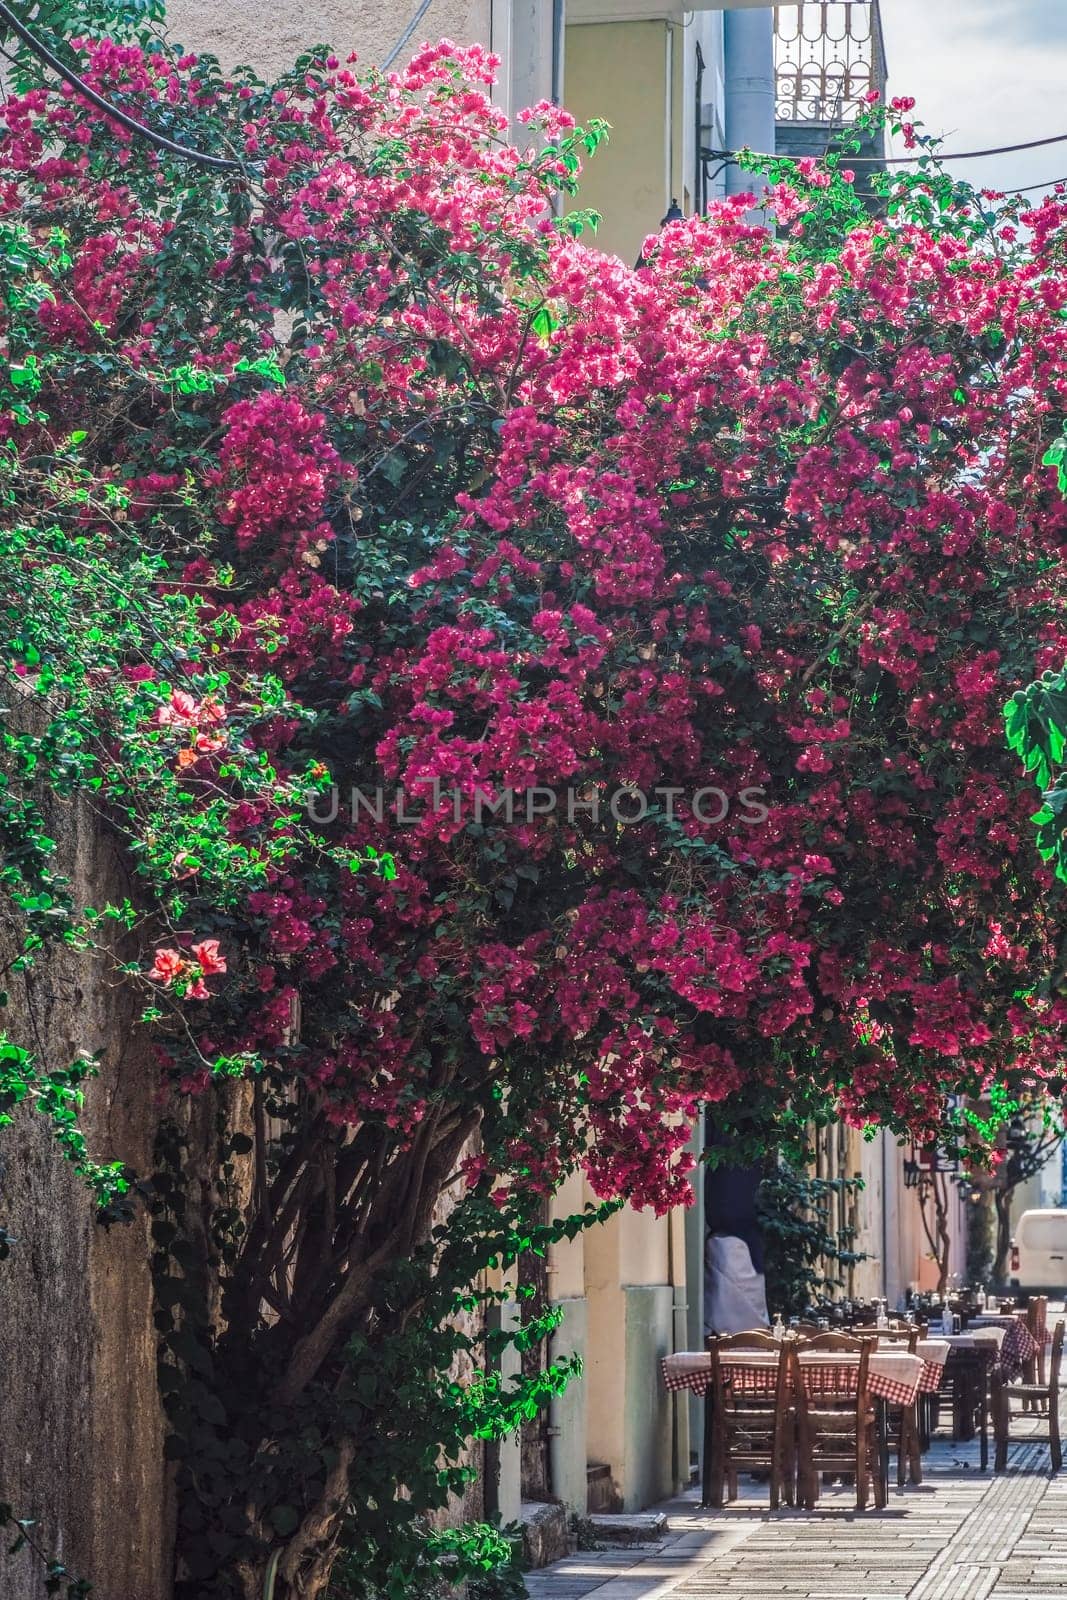 Bougainvillea ornamental bush with vivid color flowers before a pedestrian area with tavern tables in Nafplio, Greece.